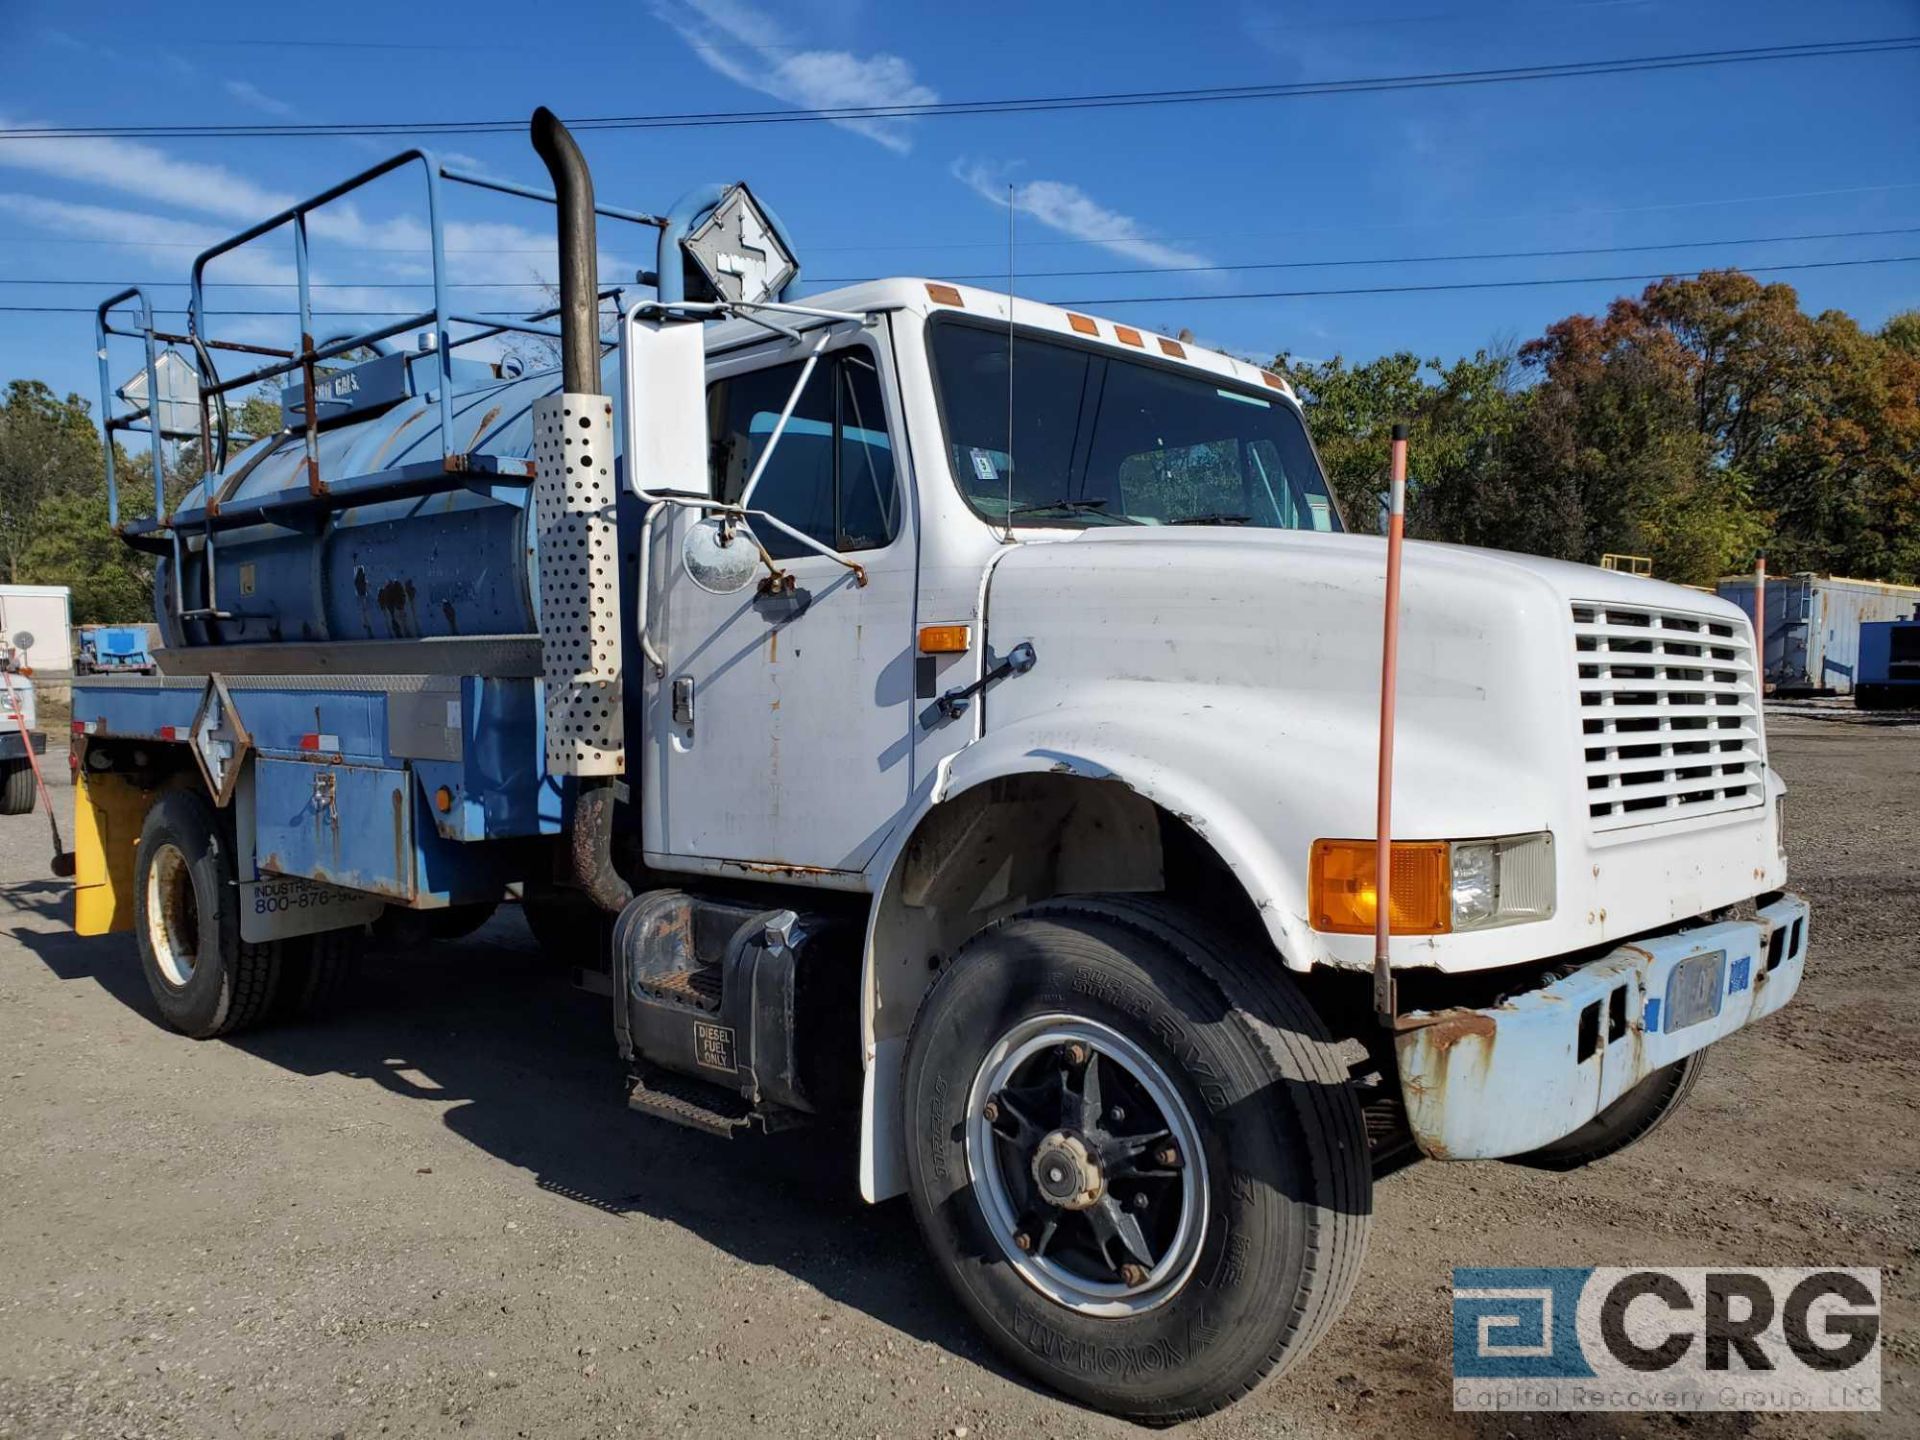 1990 International 4900 Liquid Vac Truck, 32,800 GVWR, 5,567 hours, with 2,300 gal. capacity - Image 2 of 15